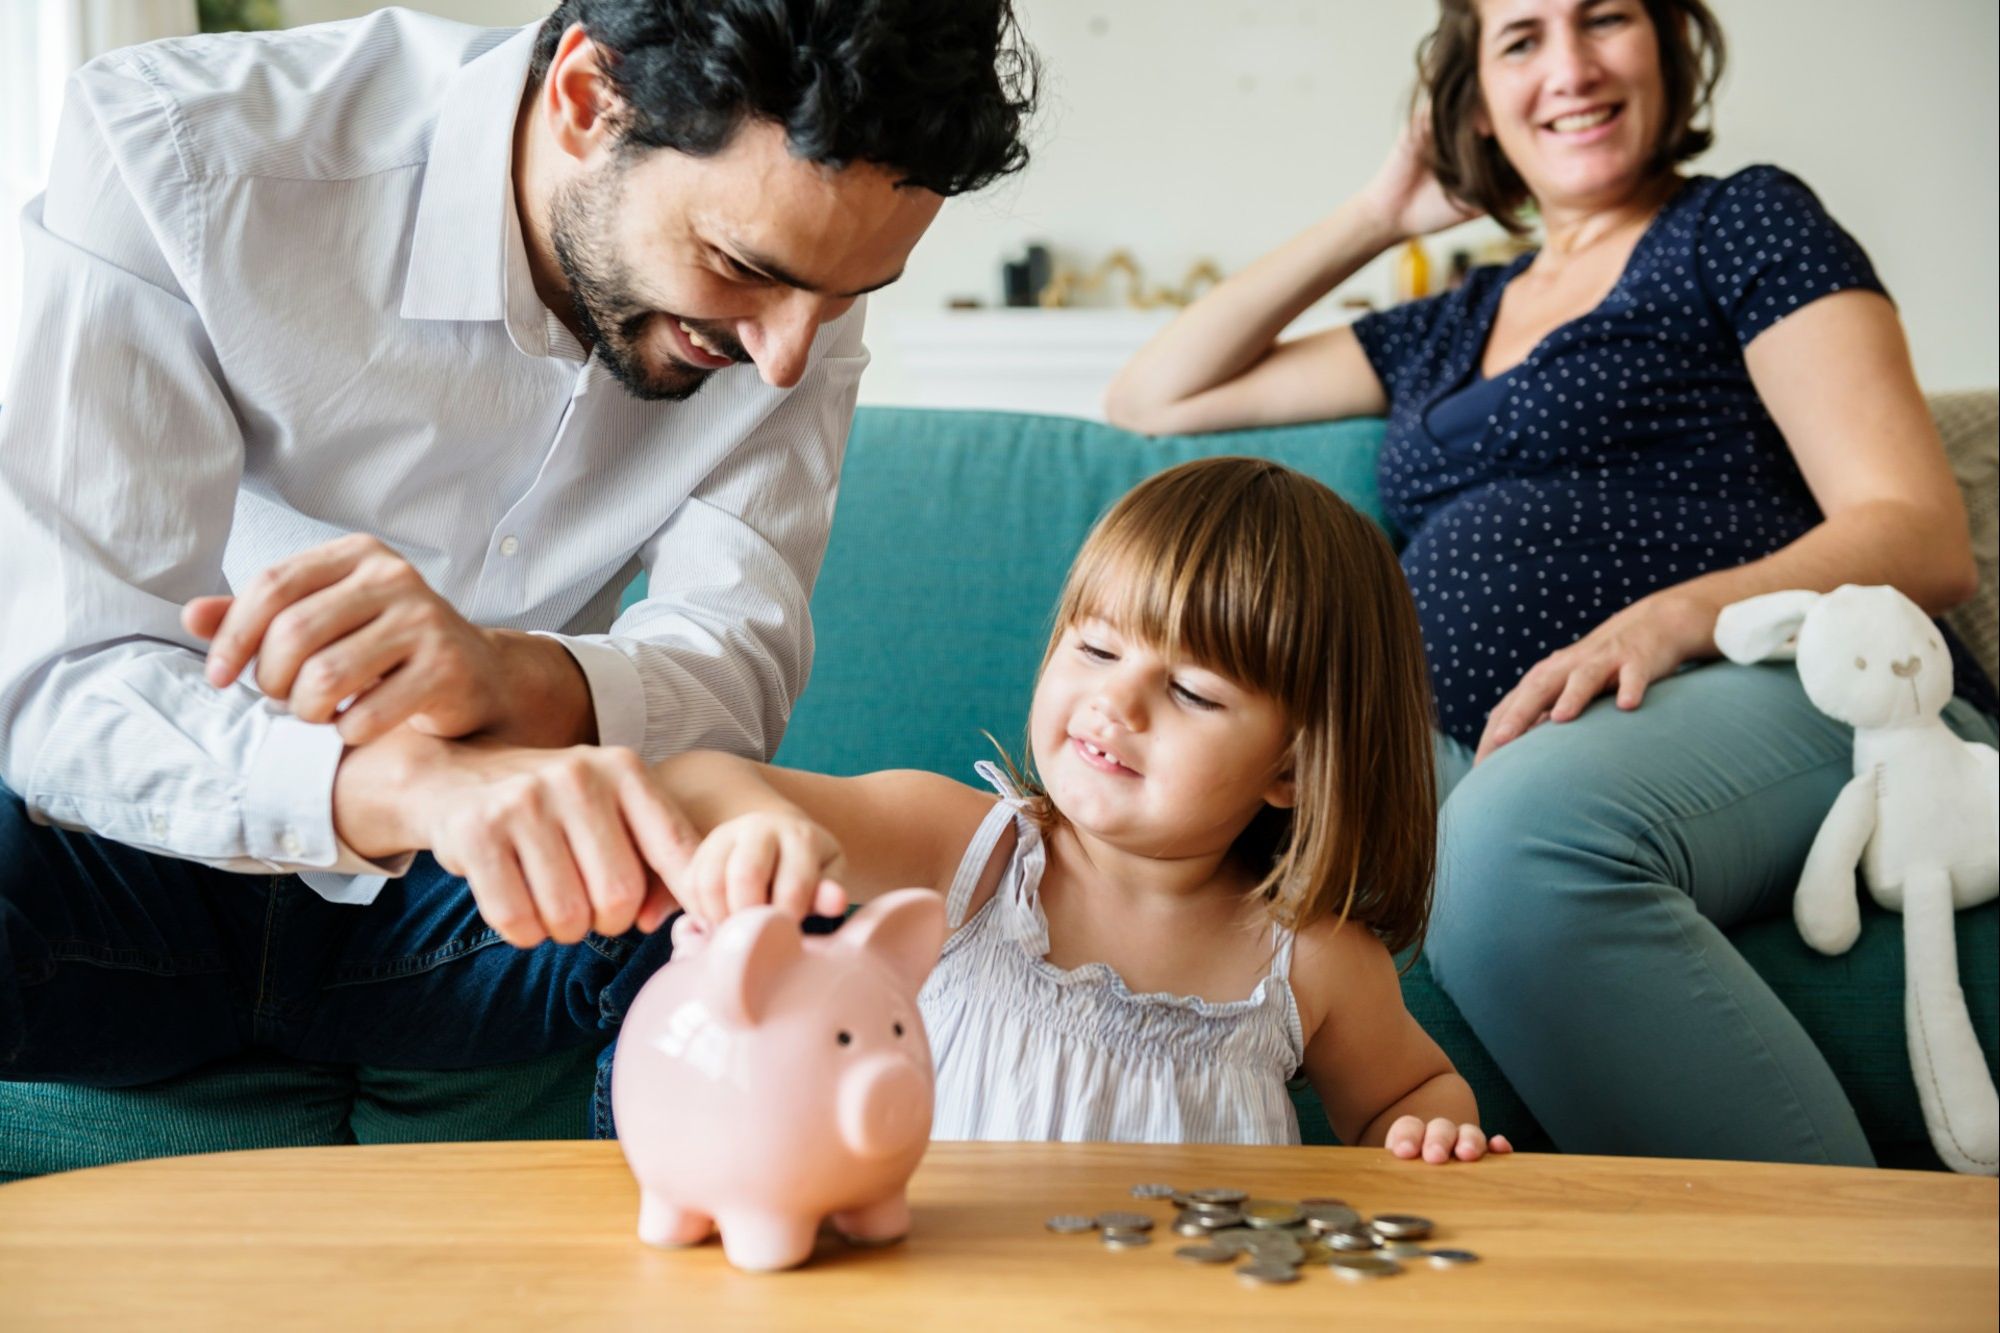 What Money Management Skills Are Parents Likely To Need?